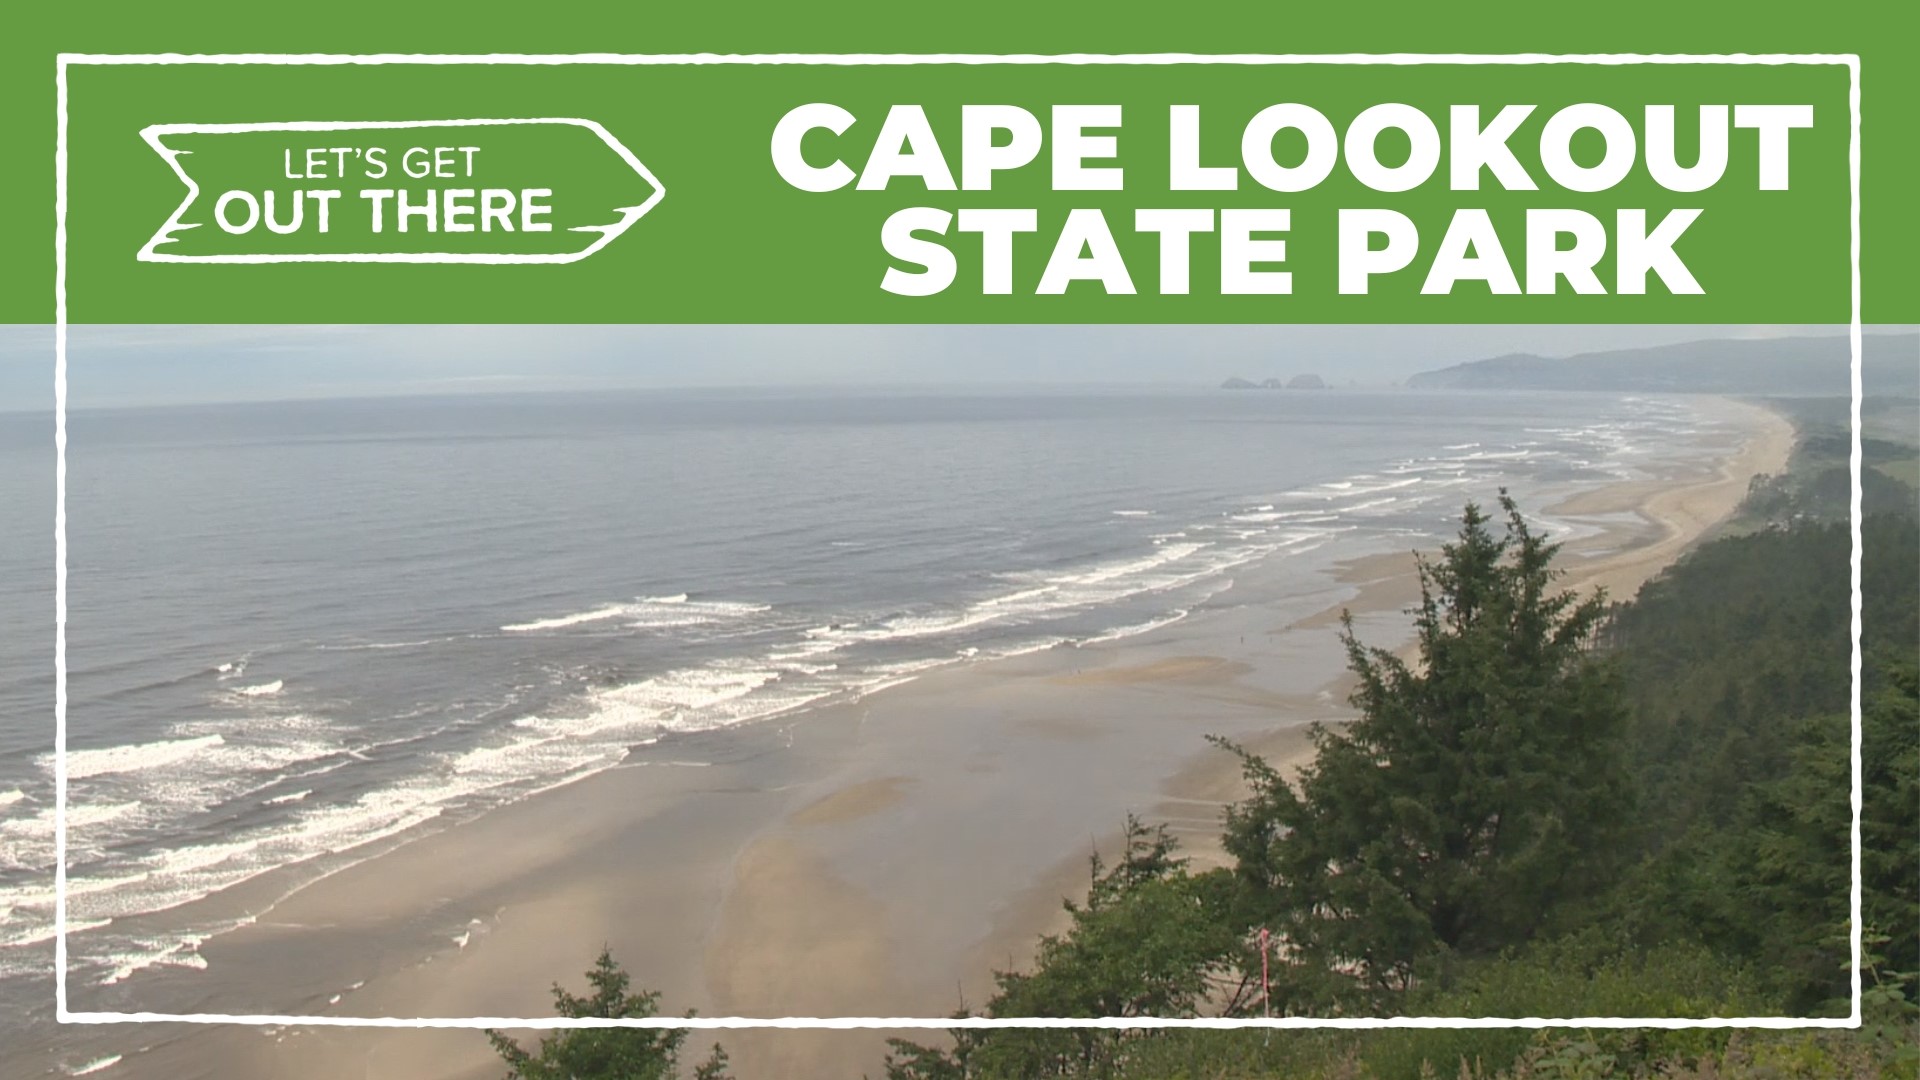 Looking for a spot on the coast away from the hustle and bustle of the summer crowds? While popular, Cape Lookout State Park in Tillamook still fits the bill.